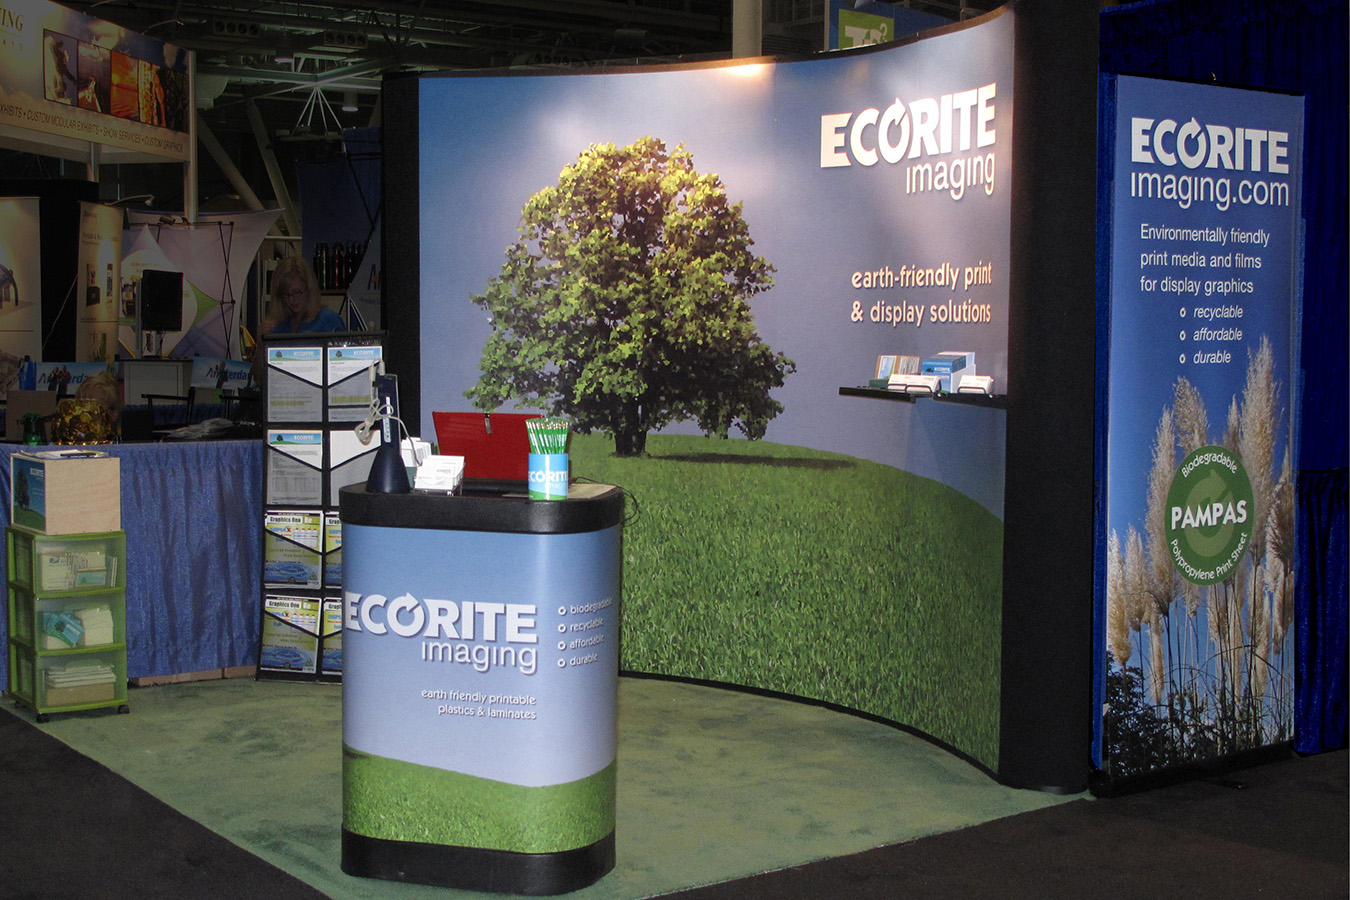 ecorite 21 : This display uses biodegradable print substrates and biodegradable ink!